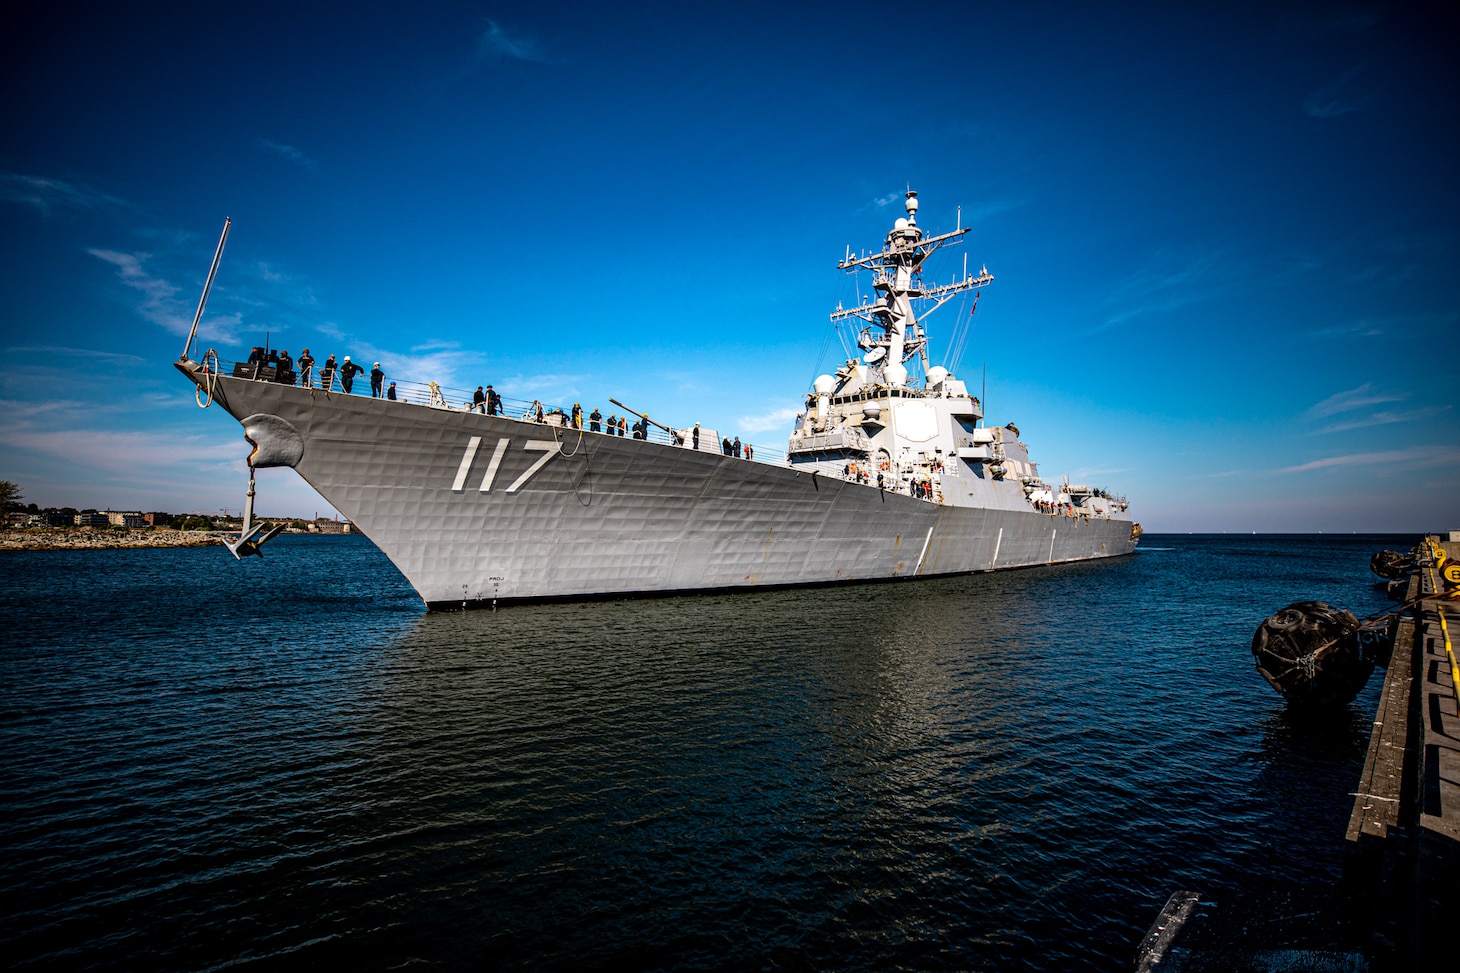 The Arleigh Burke-class guided-missile destroyer USS Paul Ignatius (DDG 117) arrives in Tallinn, Estonia for a scheduled port visit, Aug. 20, 2022.